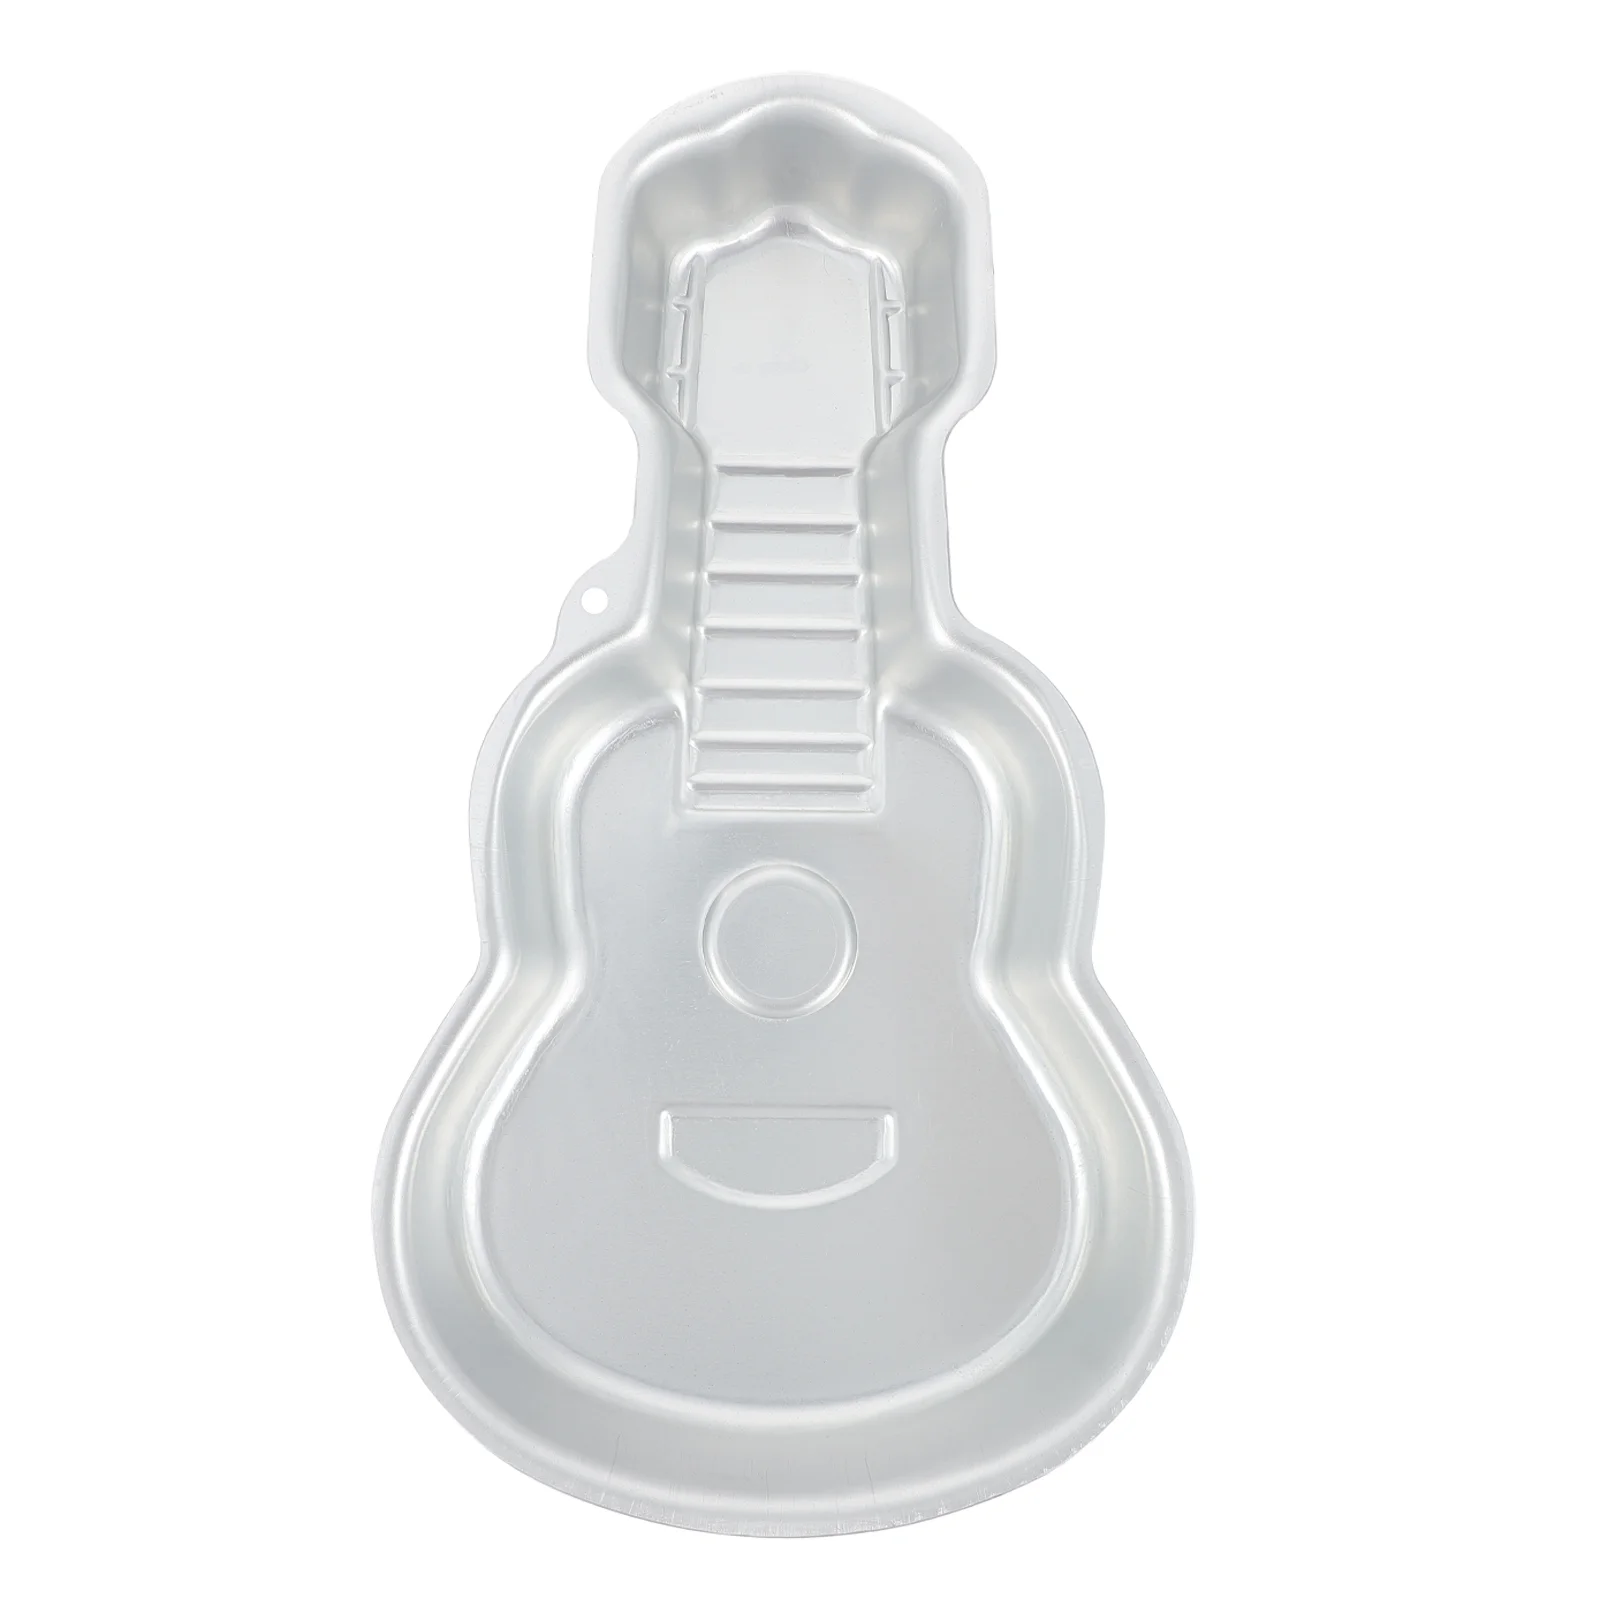 

Cake Baking Pan Guitar Mold Nonstick Tray Novelty Candy Molds Pudding Jelly Mould Christmas Pastry Pizza Bottom Removable Shape